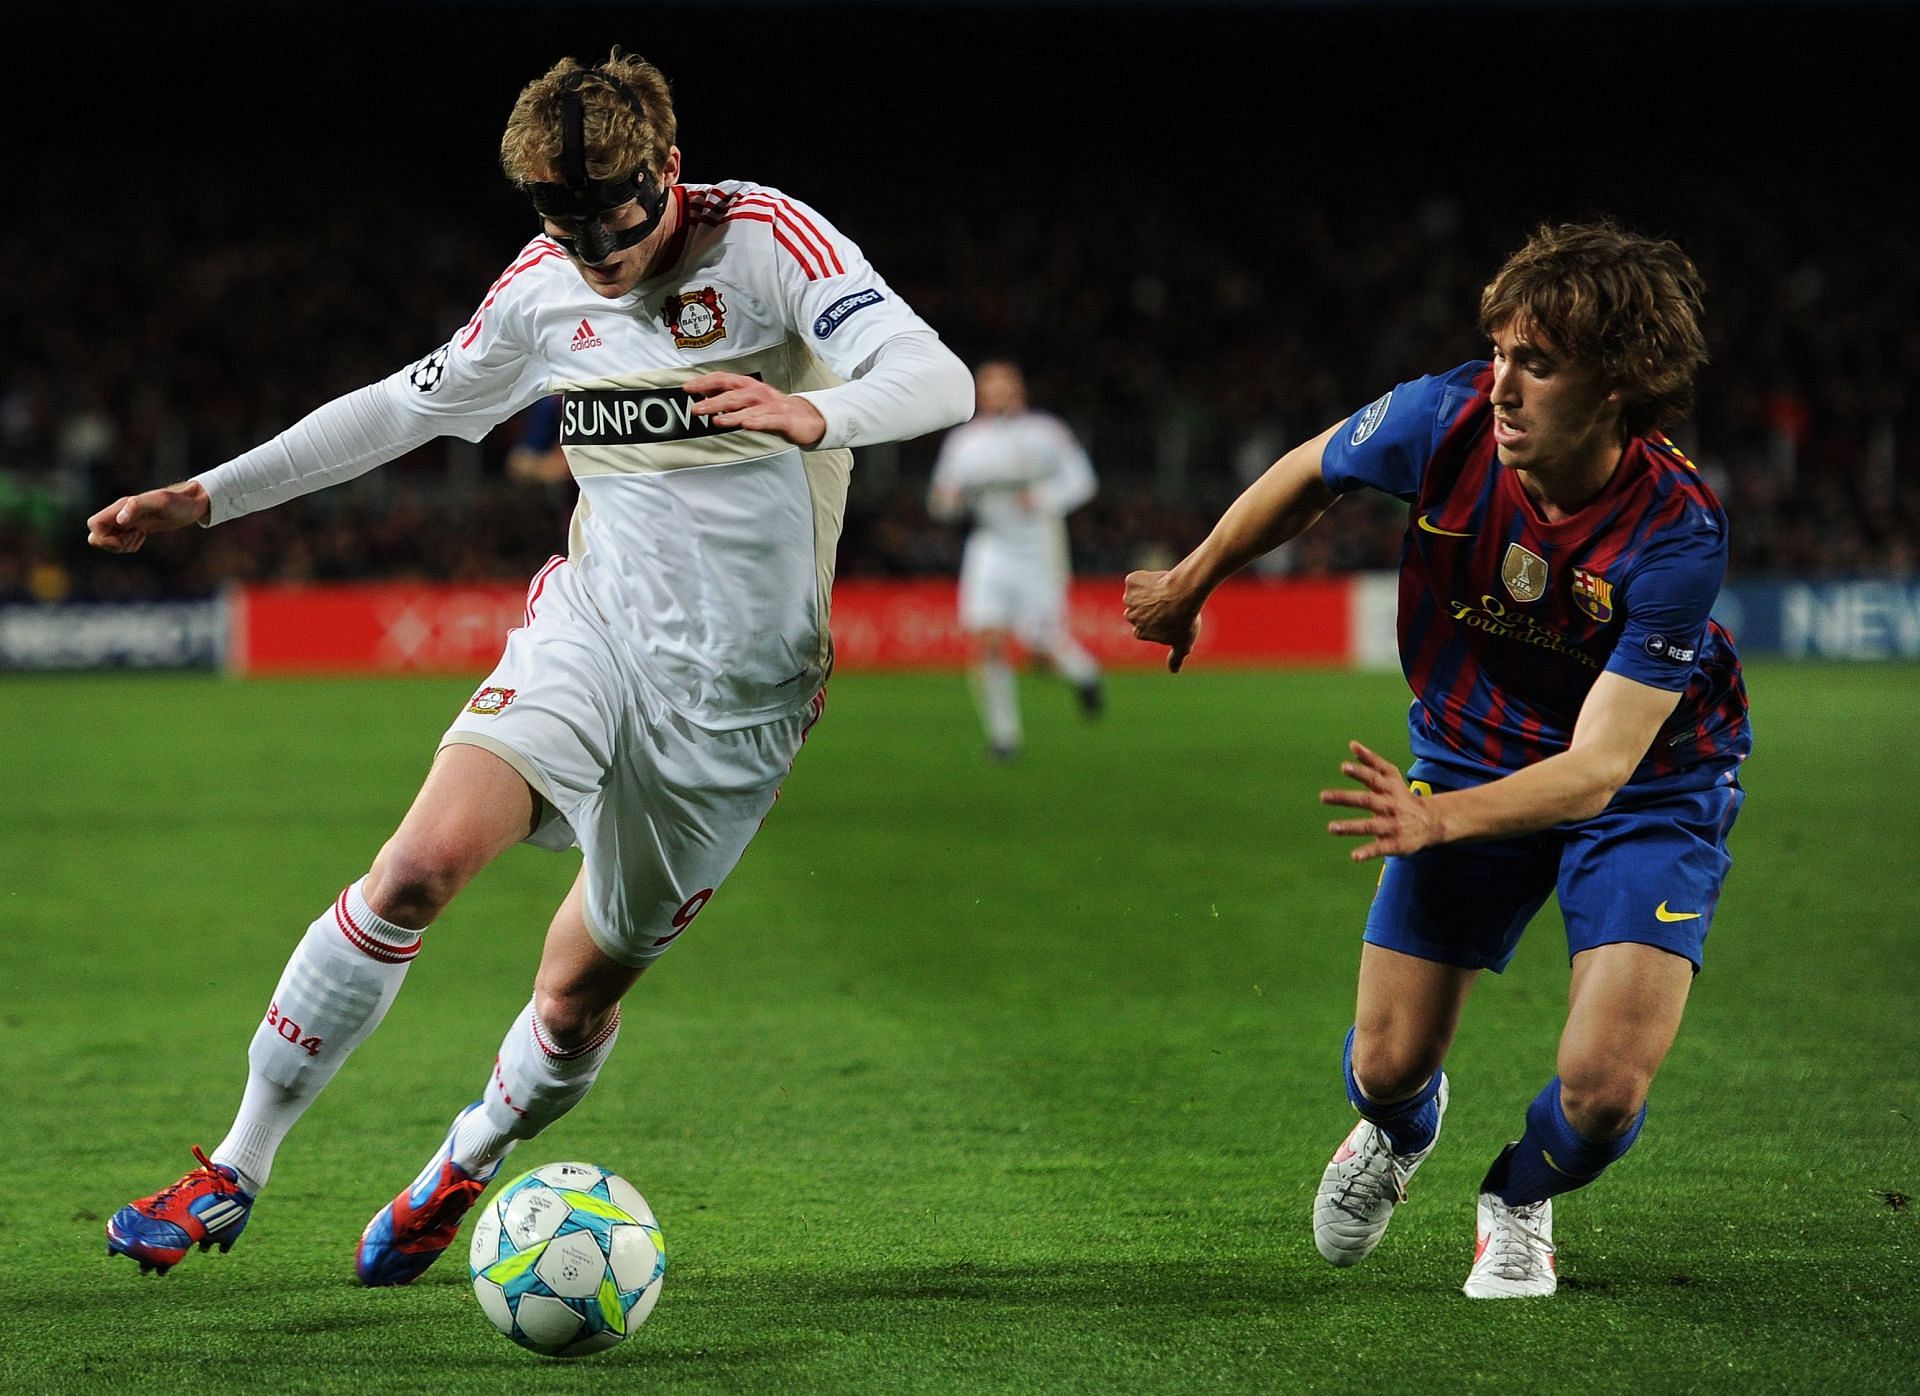 Muniesa earned himself a call-up to the senior side during the 2009 season